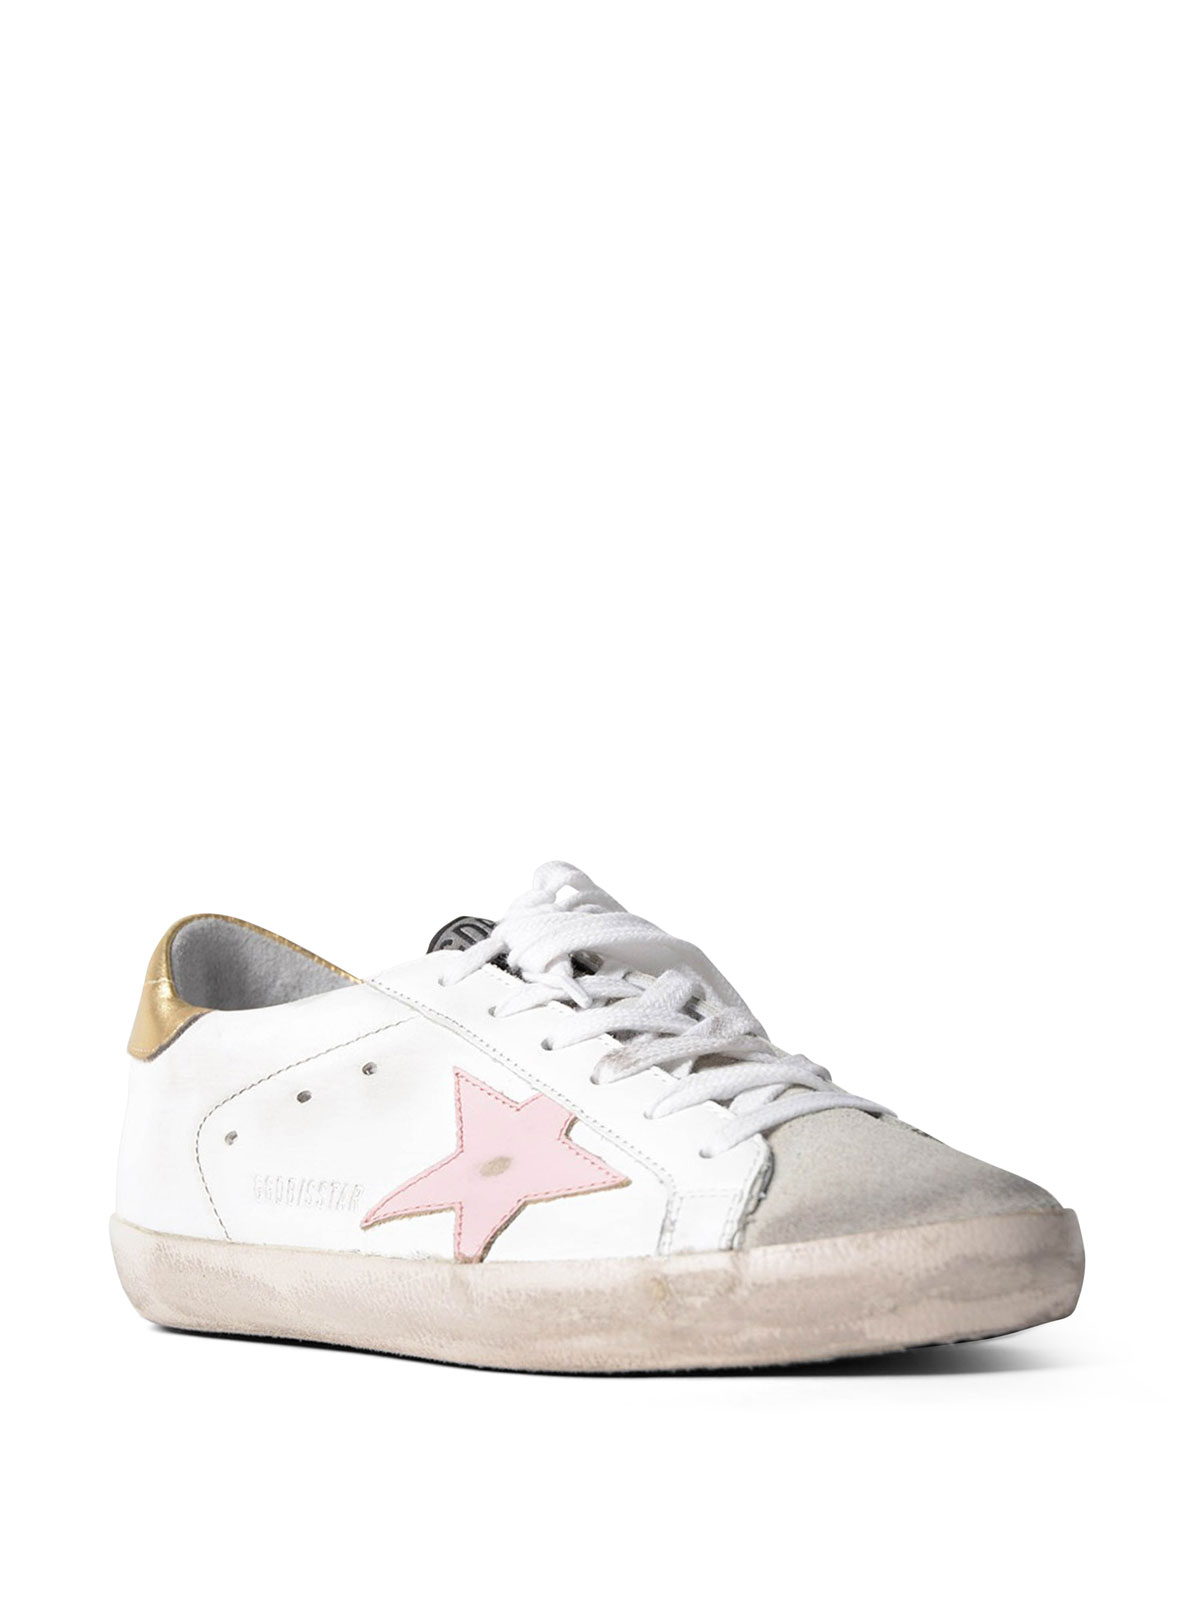 Superstar pink star sneakers by Golden Goose - trainers | iKRIX